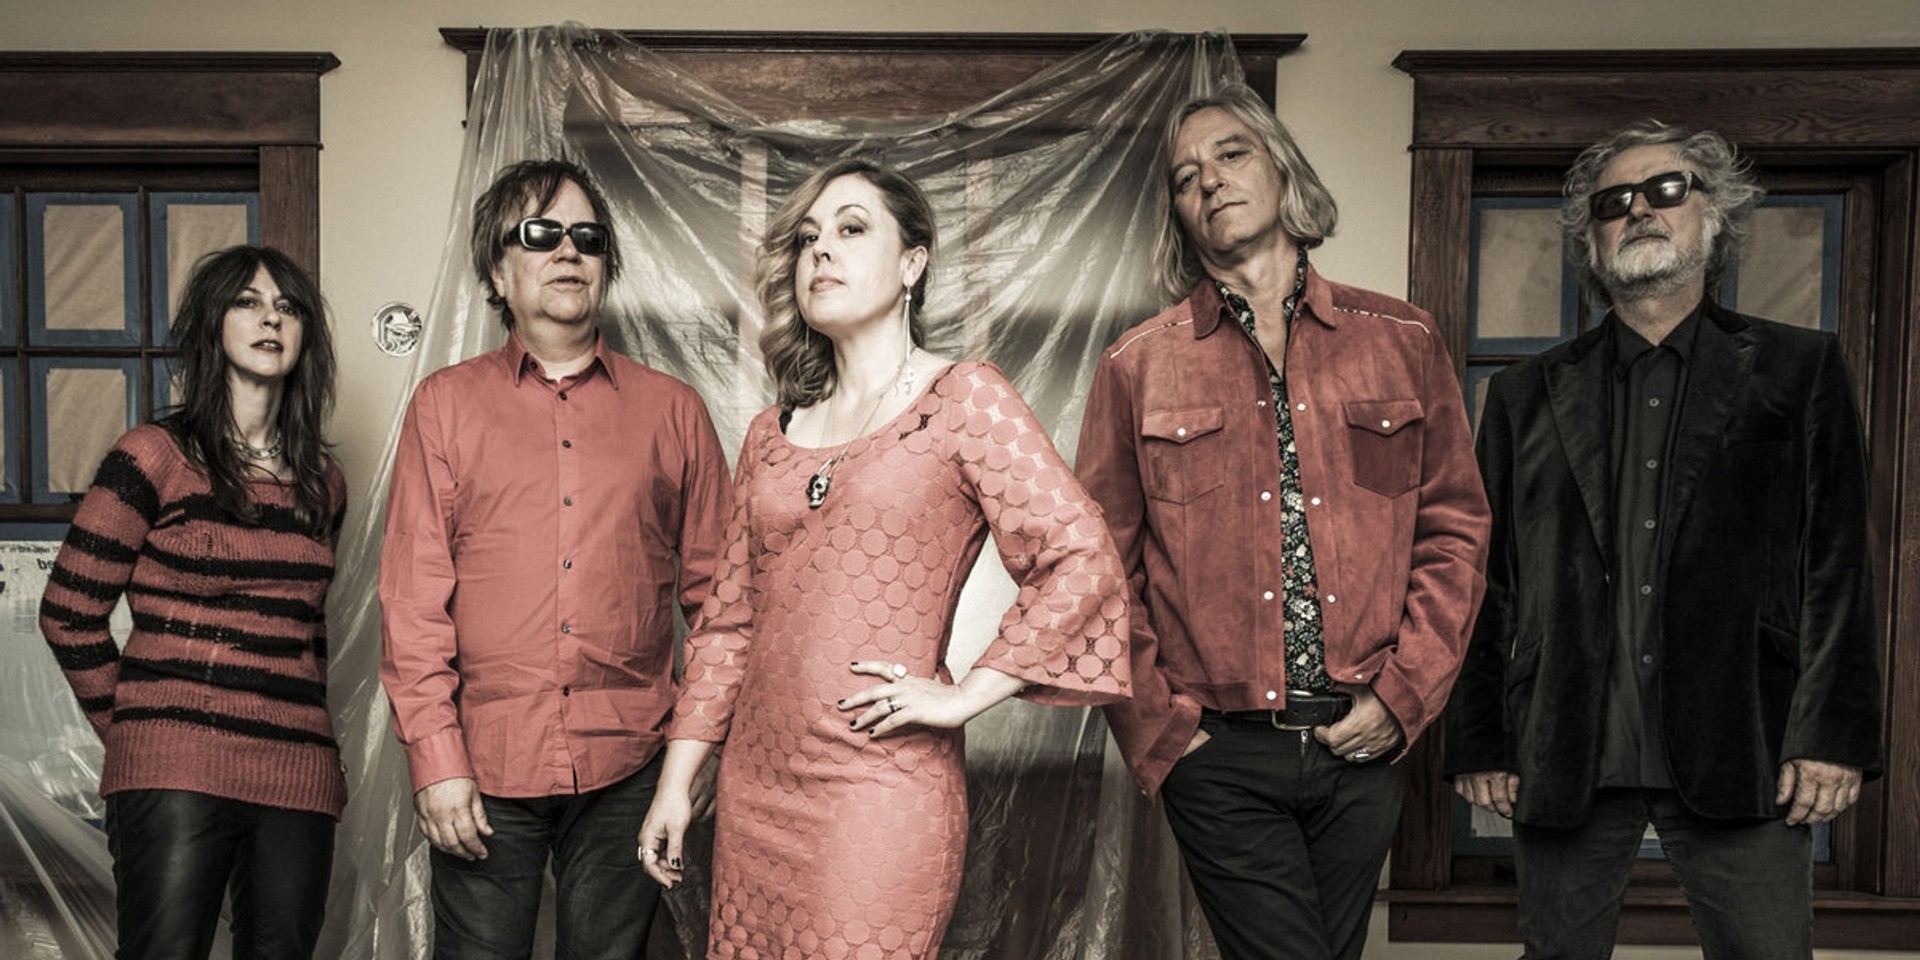 Filthy Friends, featuring members of R.E.M and Sleater-Kinney, release new track 'Last Chance County', announce new album 